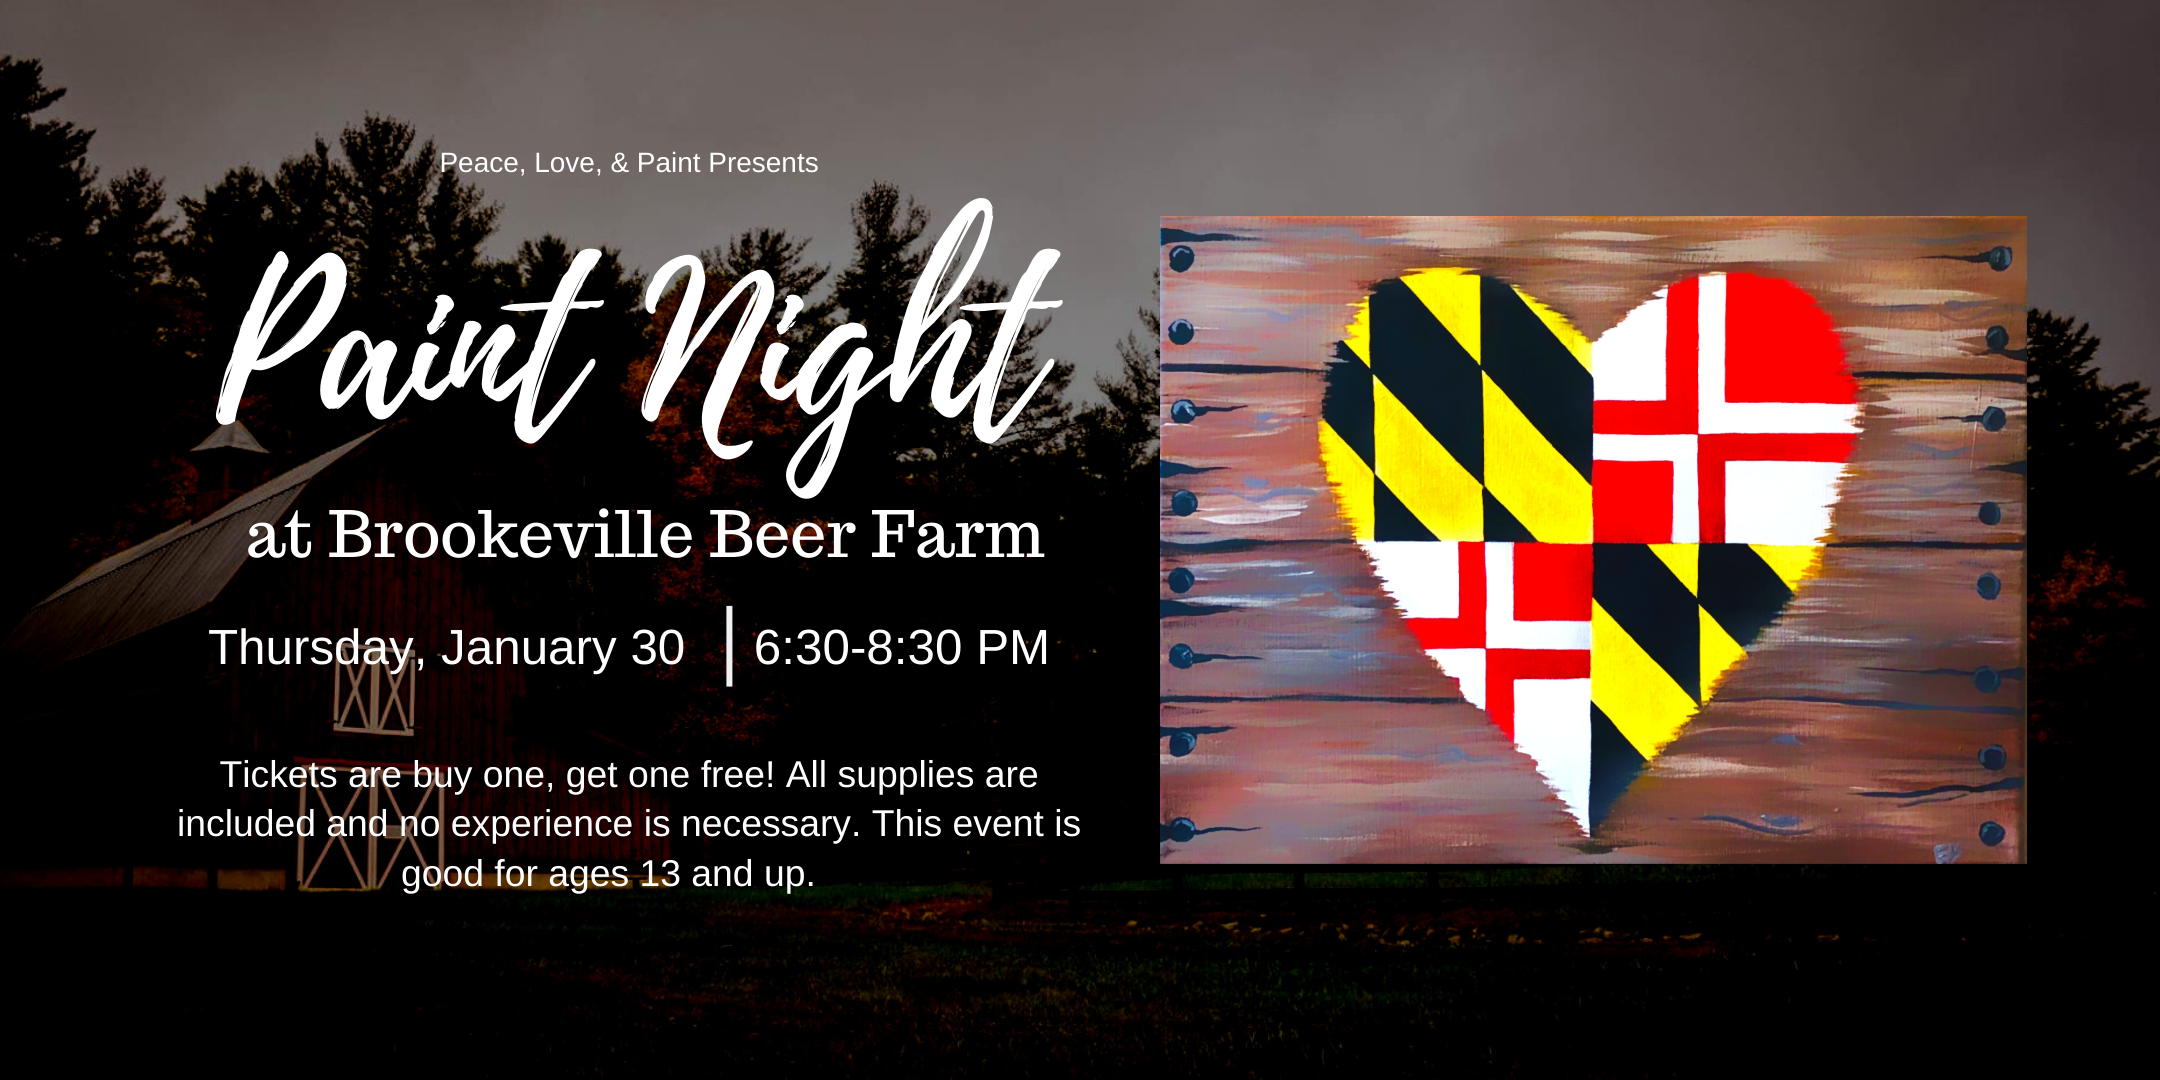 Paint Night at Brookeville Beer Farm- Buy One, Get One Free!